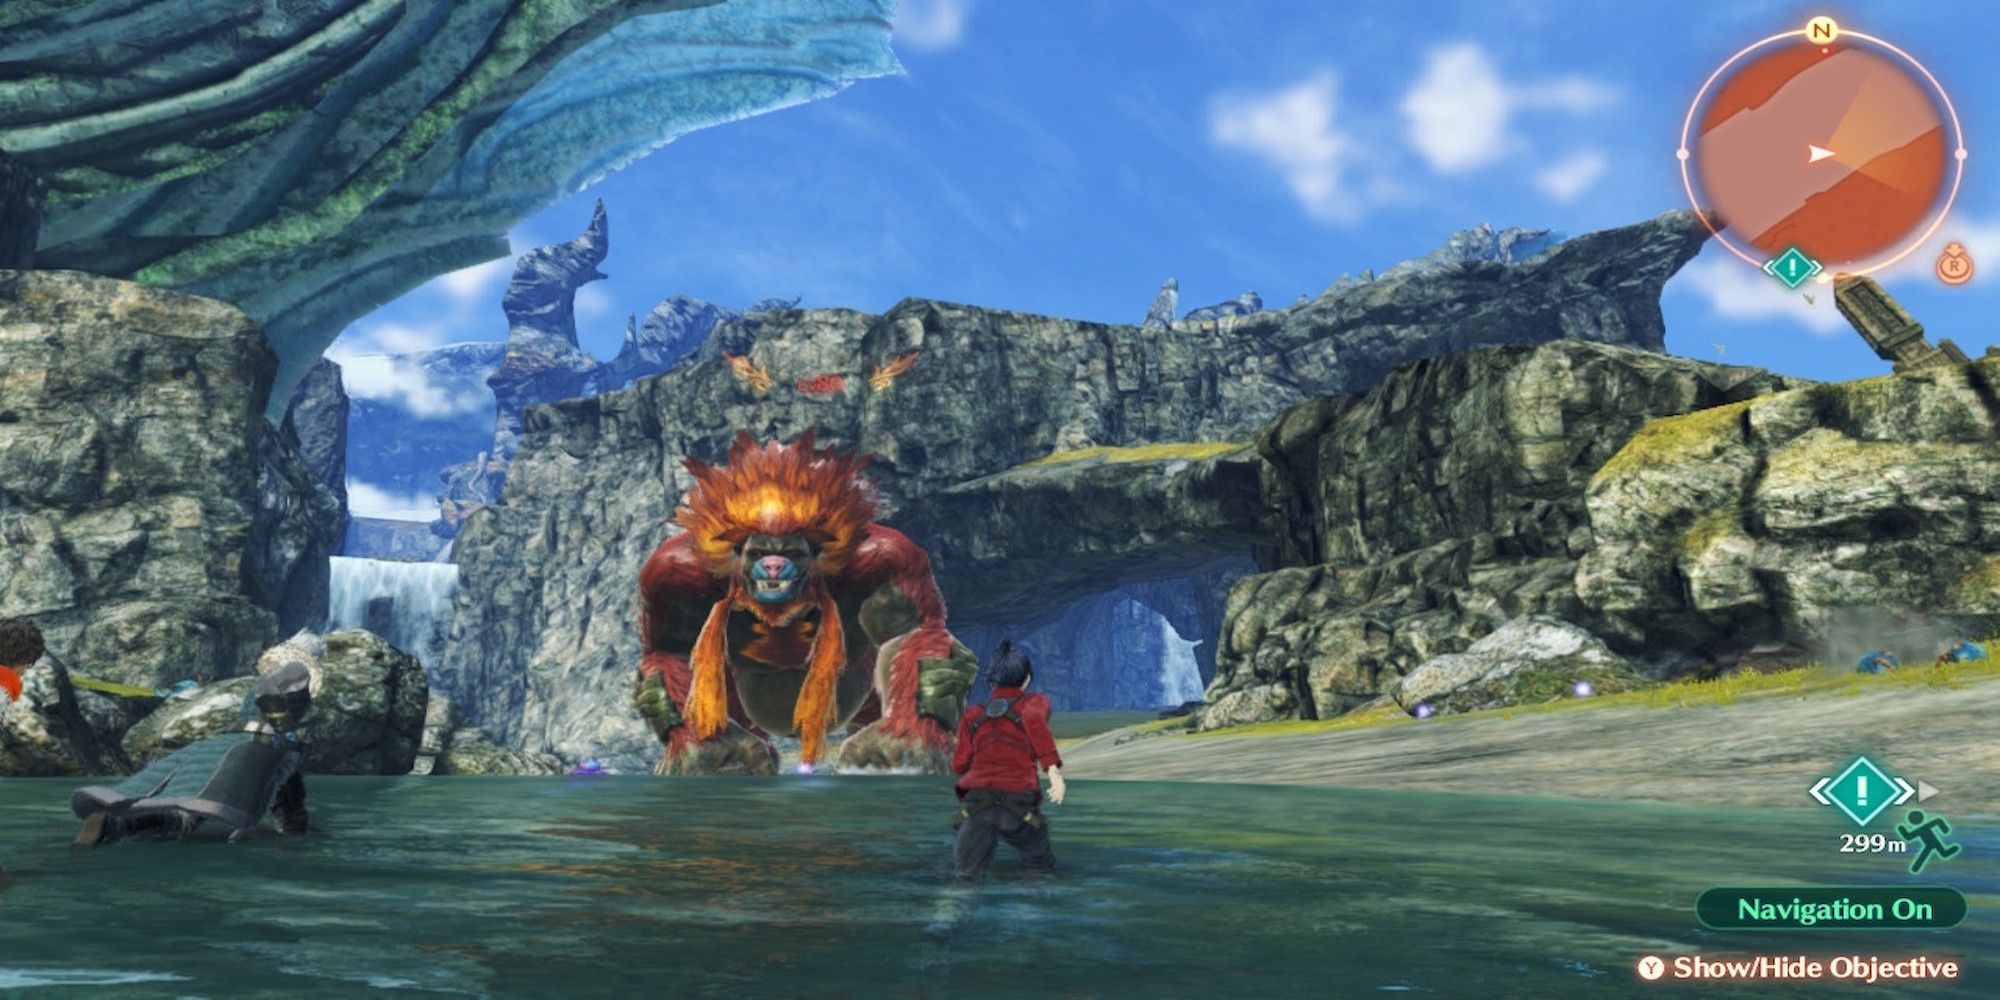 Exploring the world in Xenoblade Chronicles 3